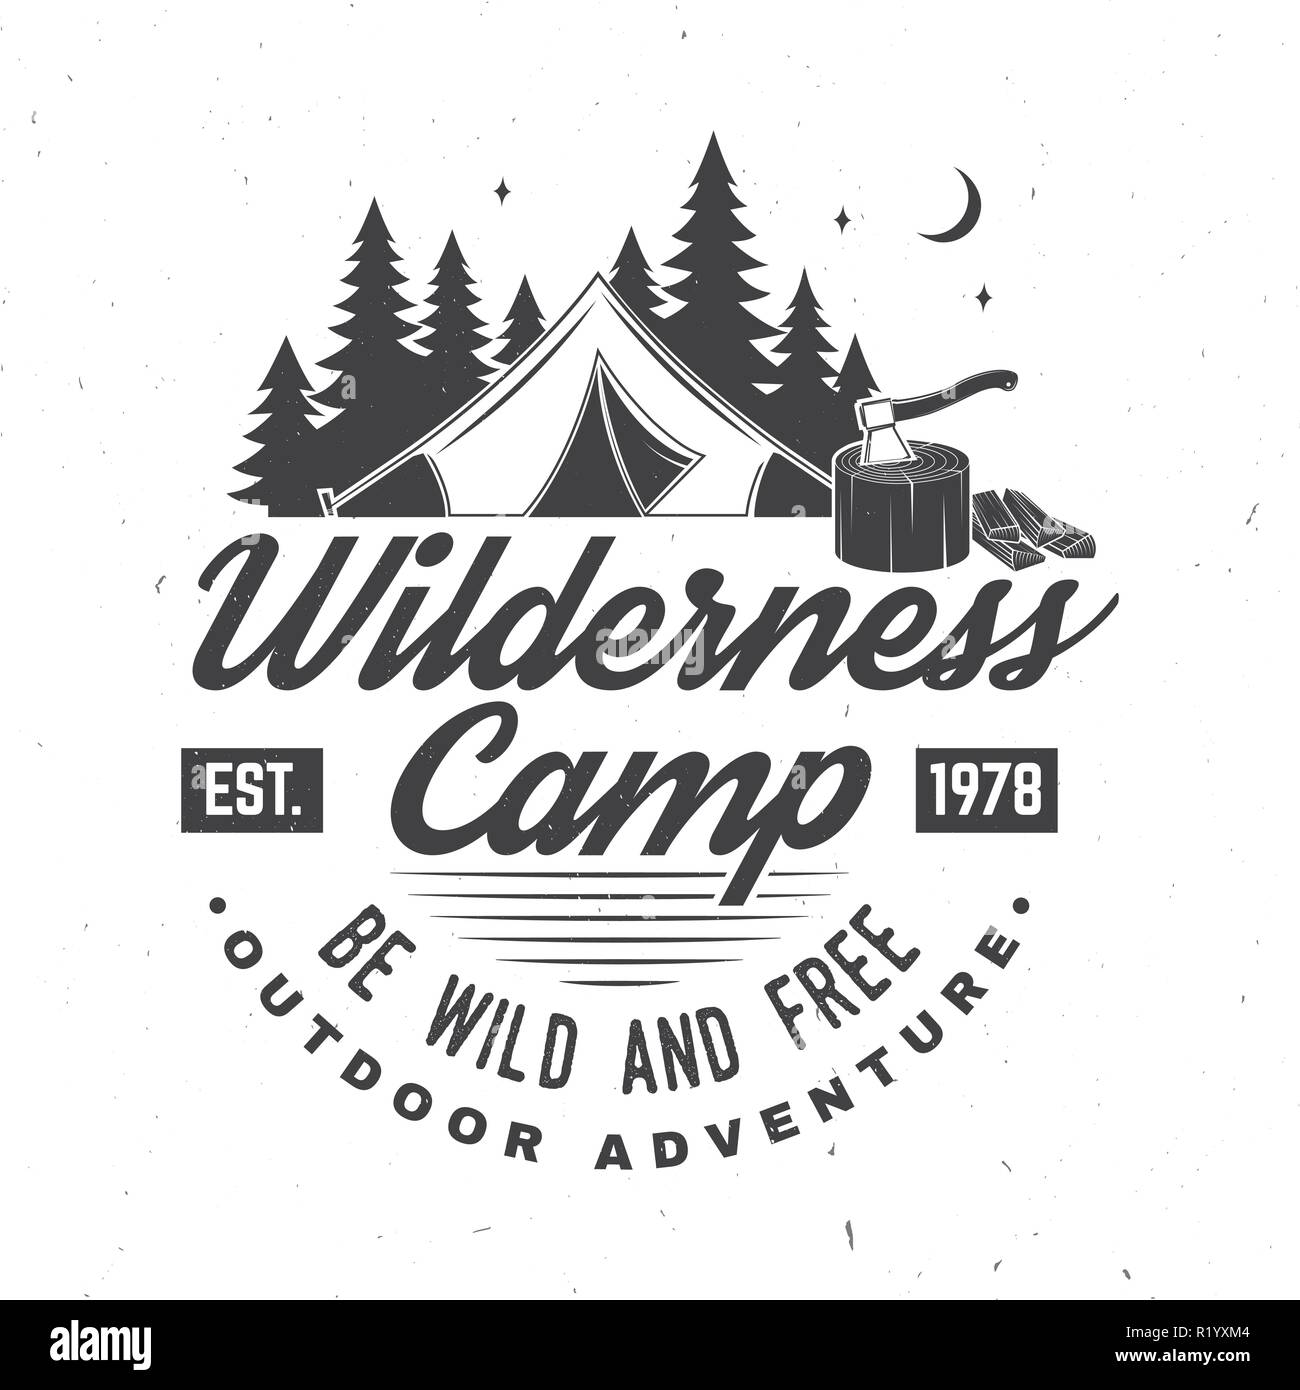 Wilderness camp. Be wild and free. Vector illustration. Concept for badge, shirt or logo, print, stamp or tee. Vintage typography design with campin tent, axe and forest silhouette. Stock Vector